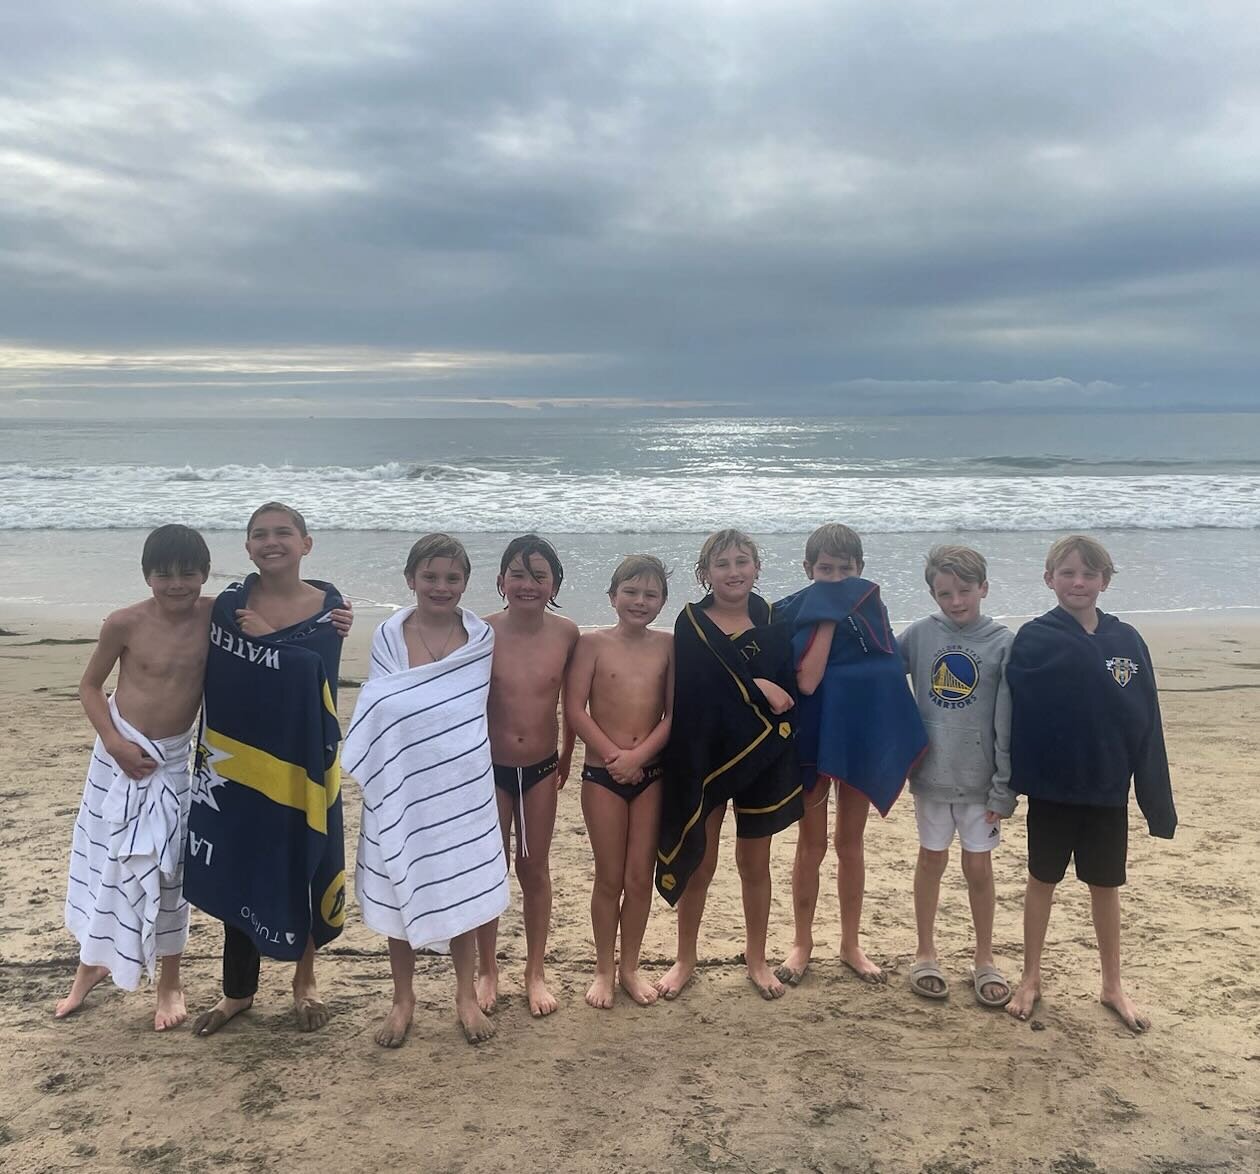 10U Blue team enjoying some team time at the beach following day 1 of games at Kap7. Good luck team!